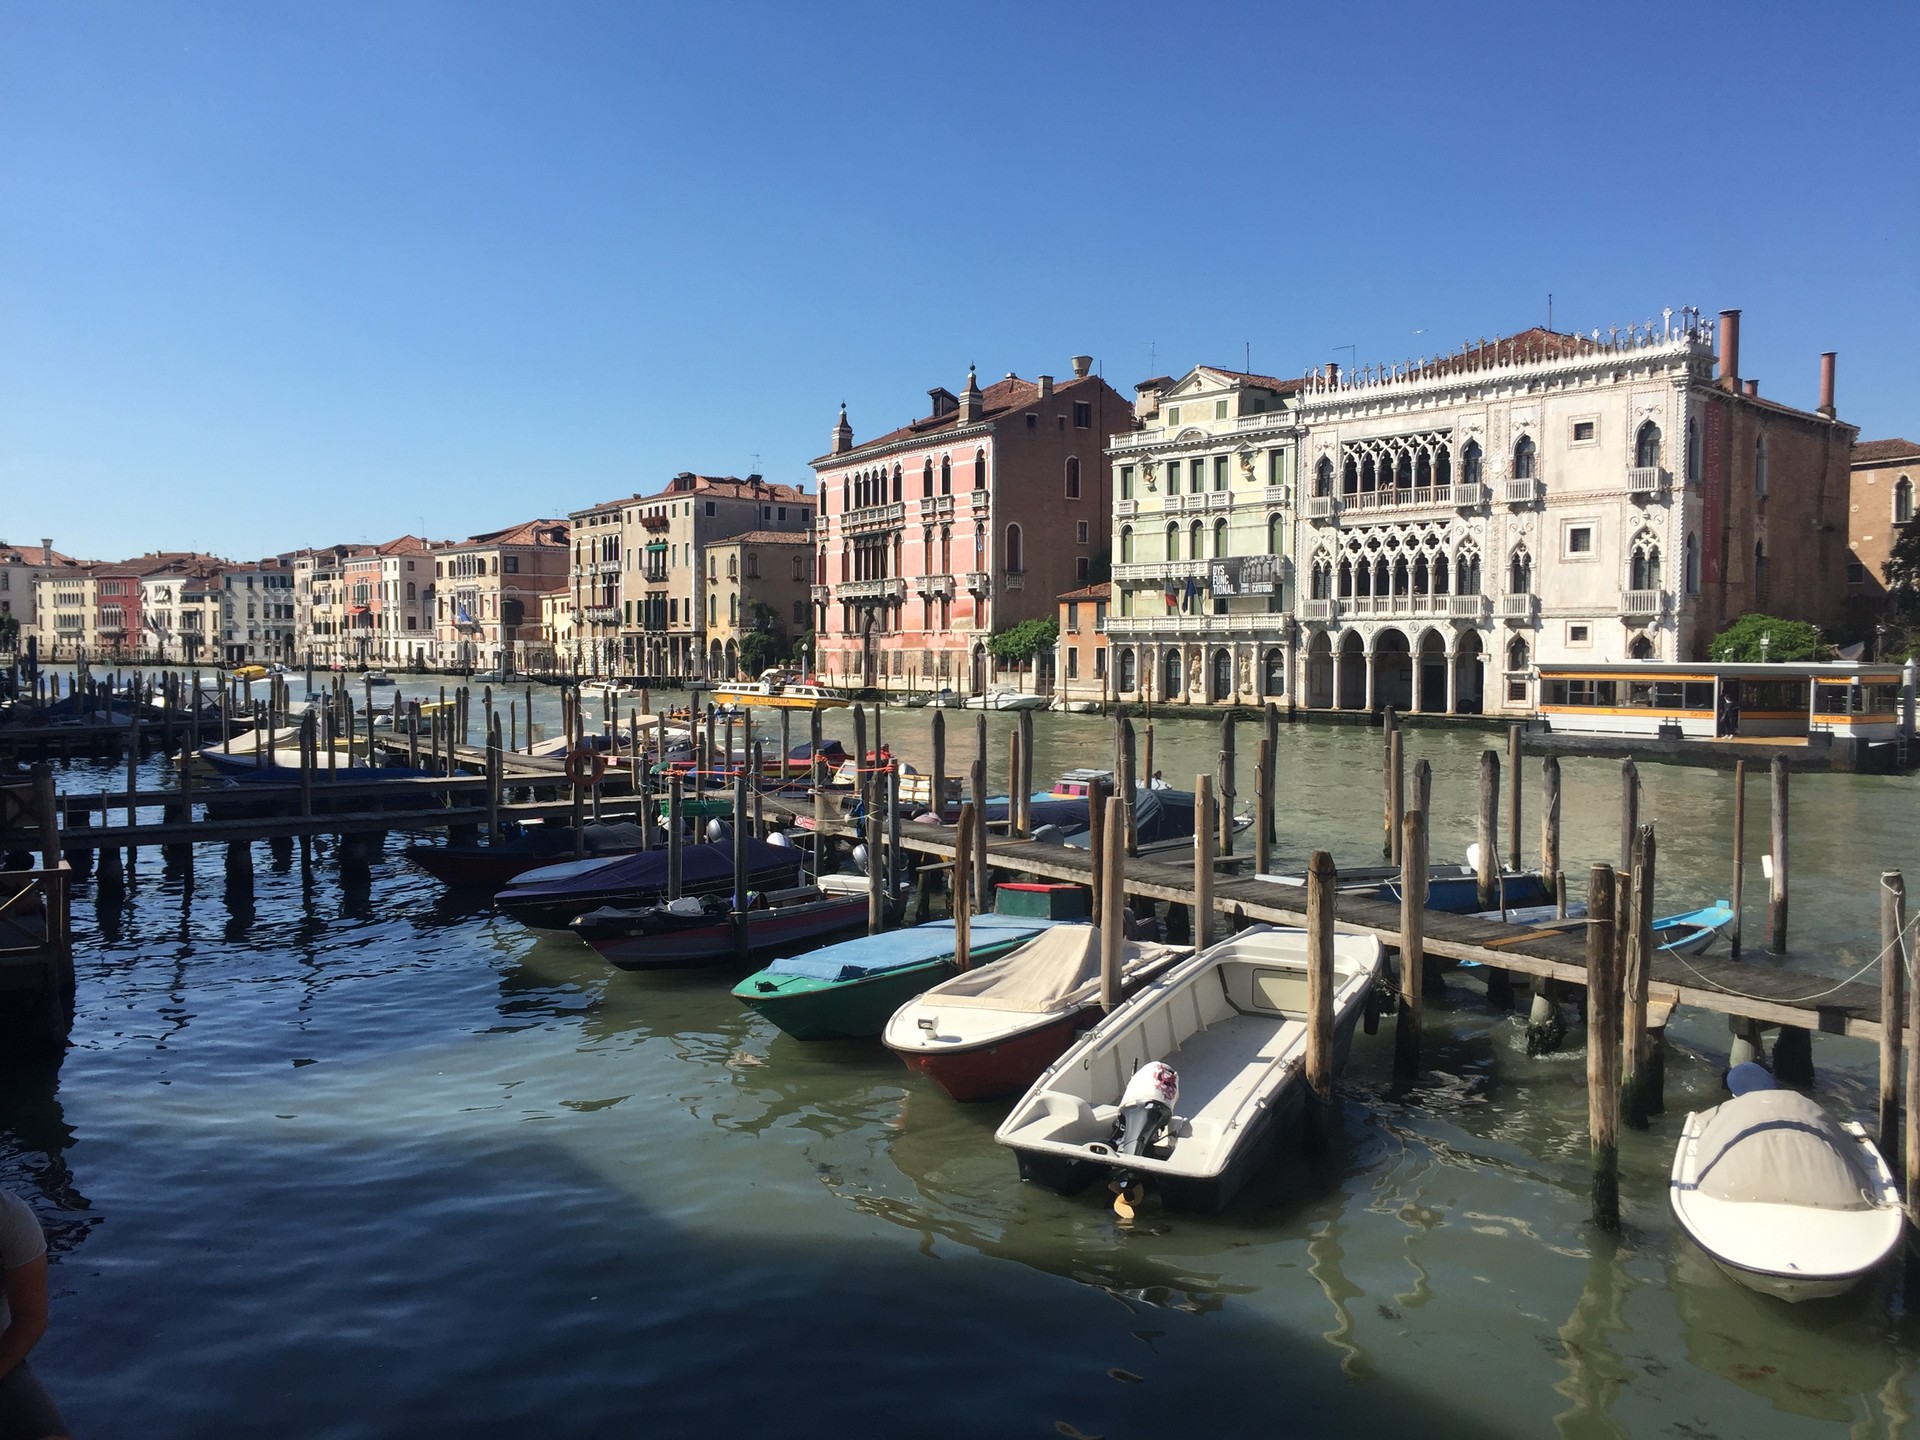 two-hours-venice-nought-euros-spent-6d7b